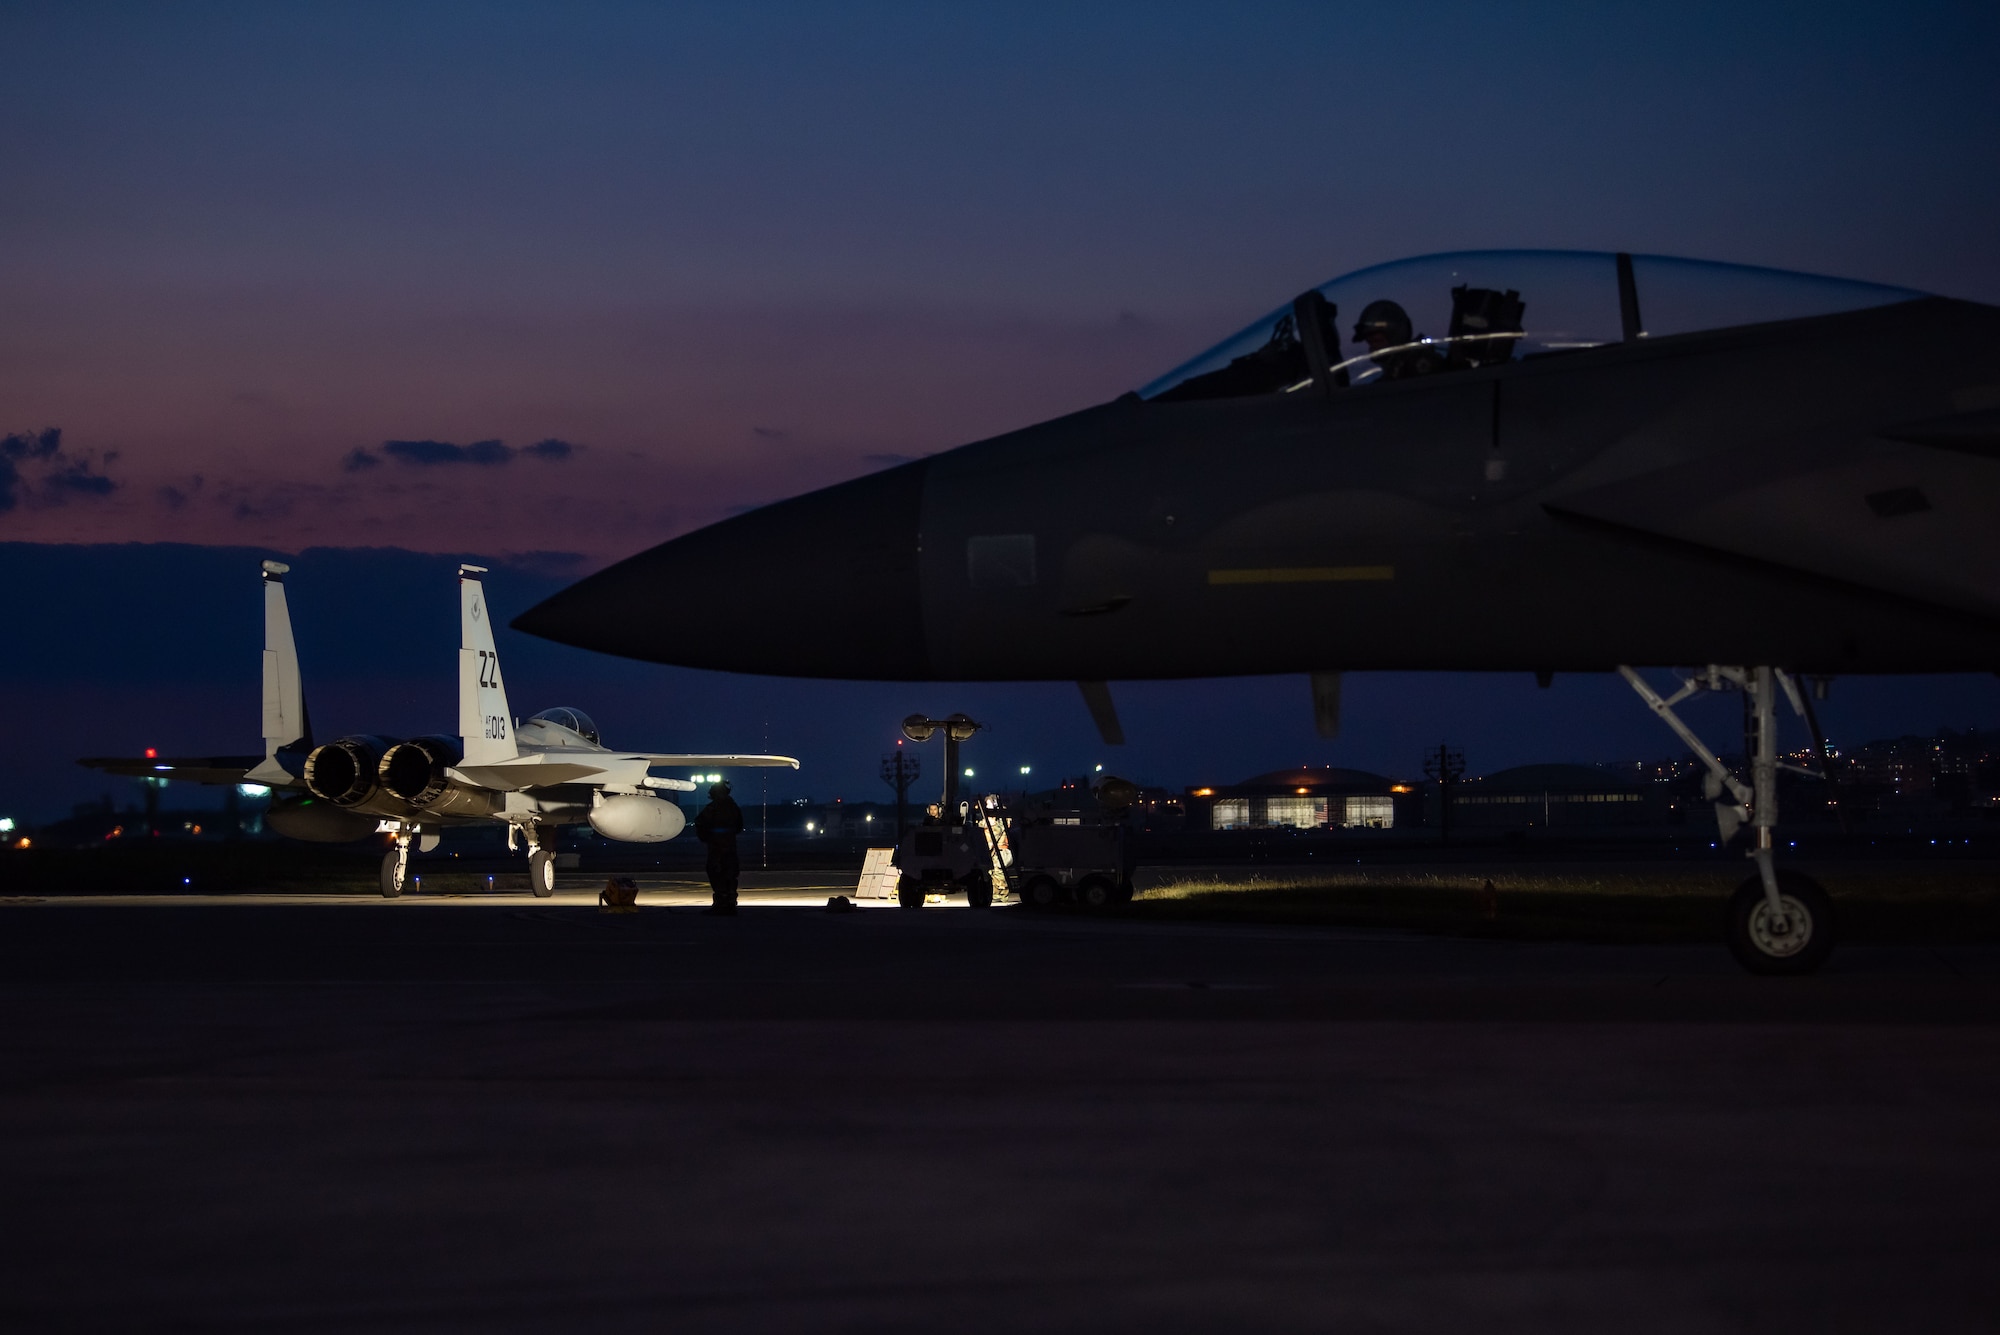 F-15C Eagles taxi on a flightline before takeoff at sunset.